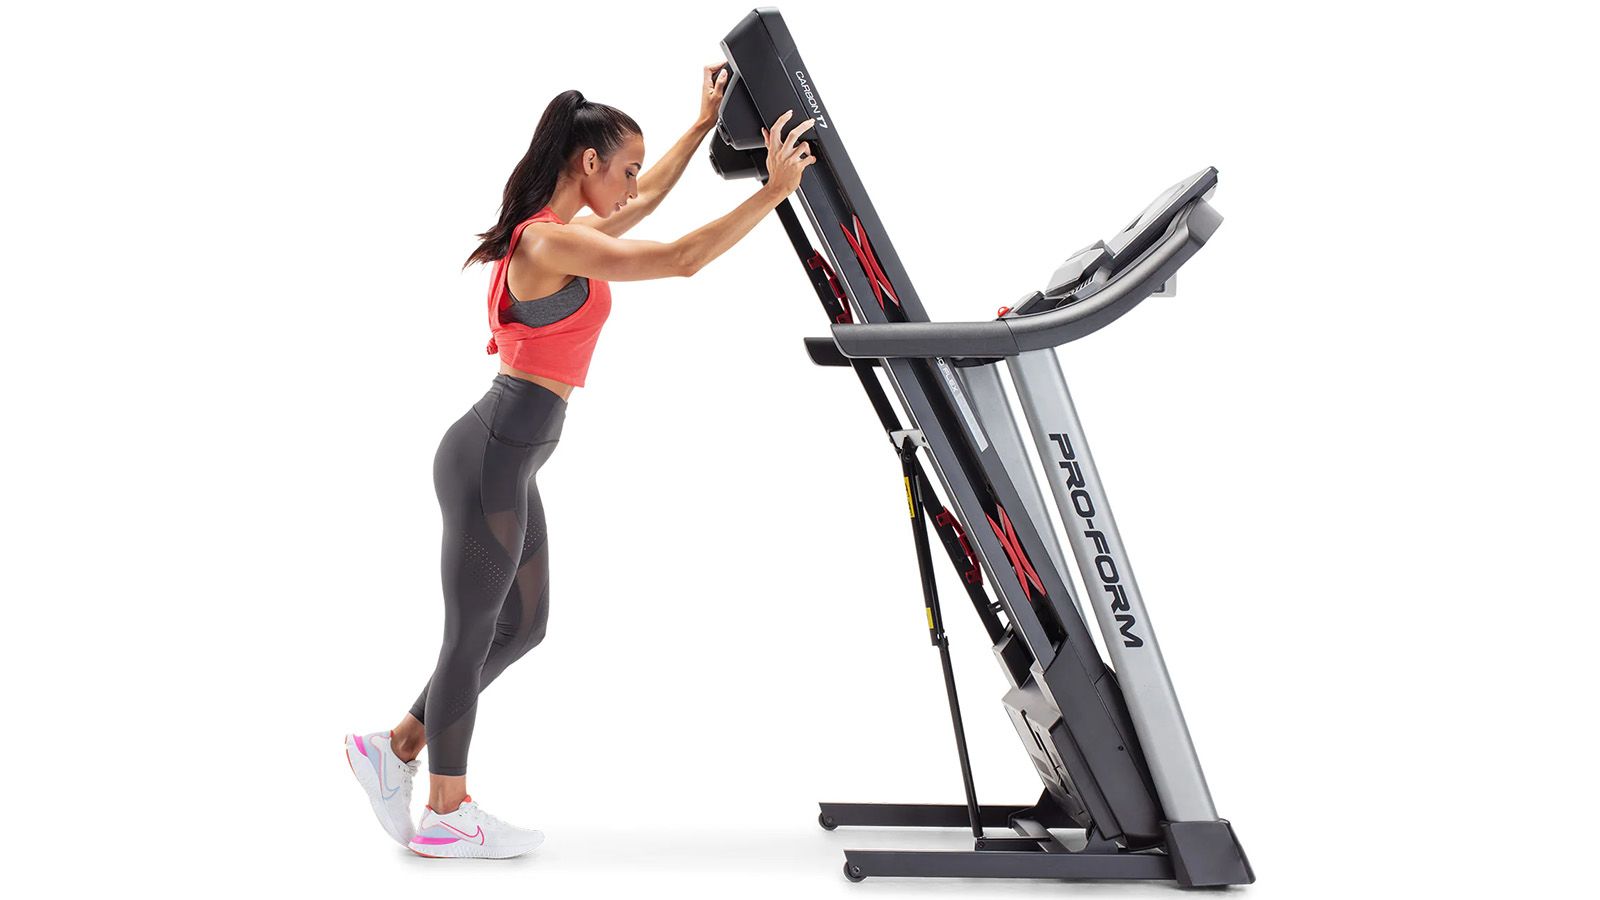 Fold the treadmill up and simply store it away.